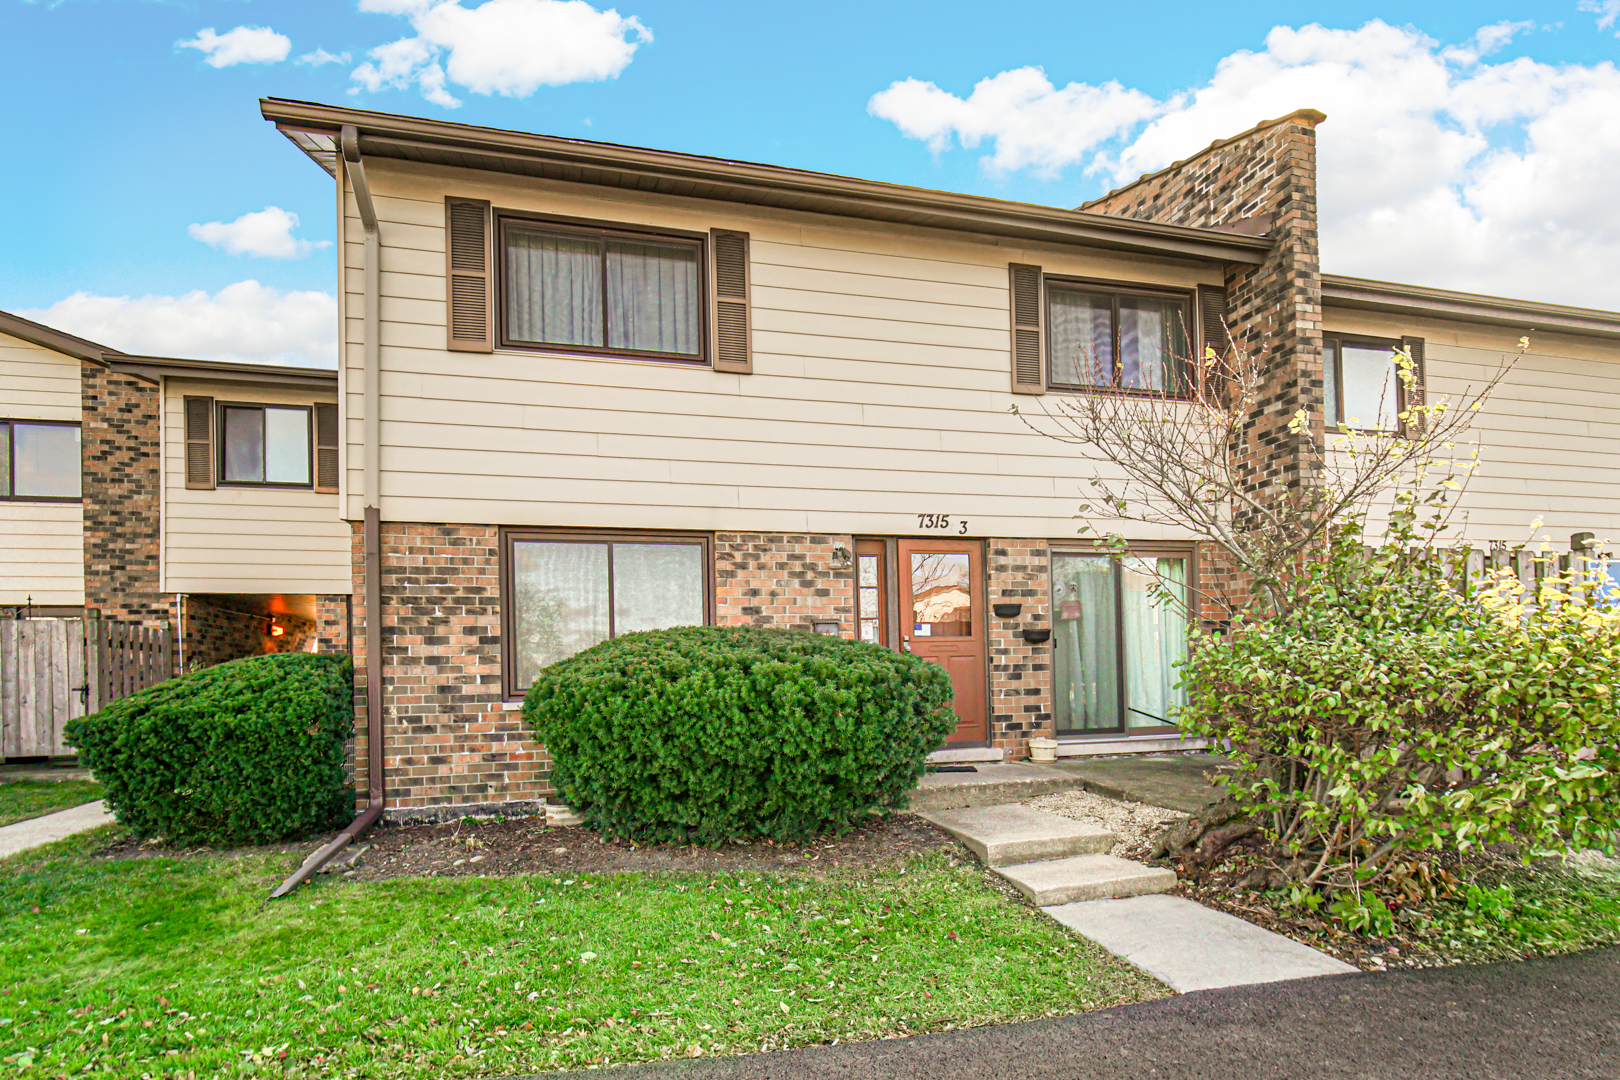 7315 Winthrop Way, Unit 3, Downers Grove, Il 60516